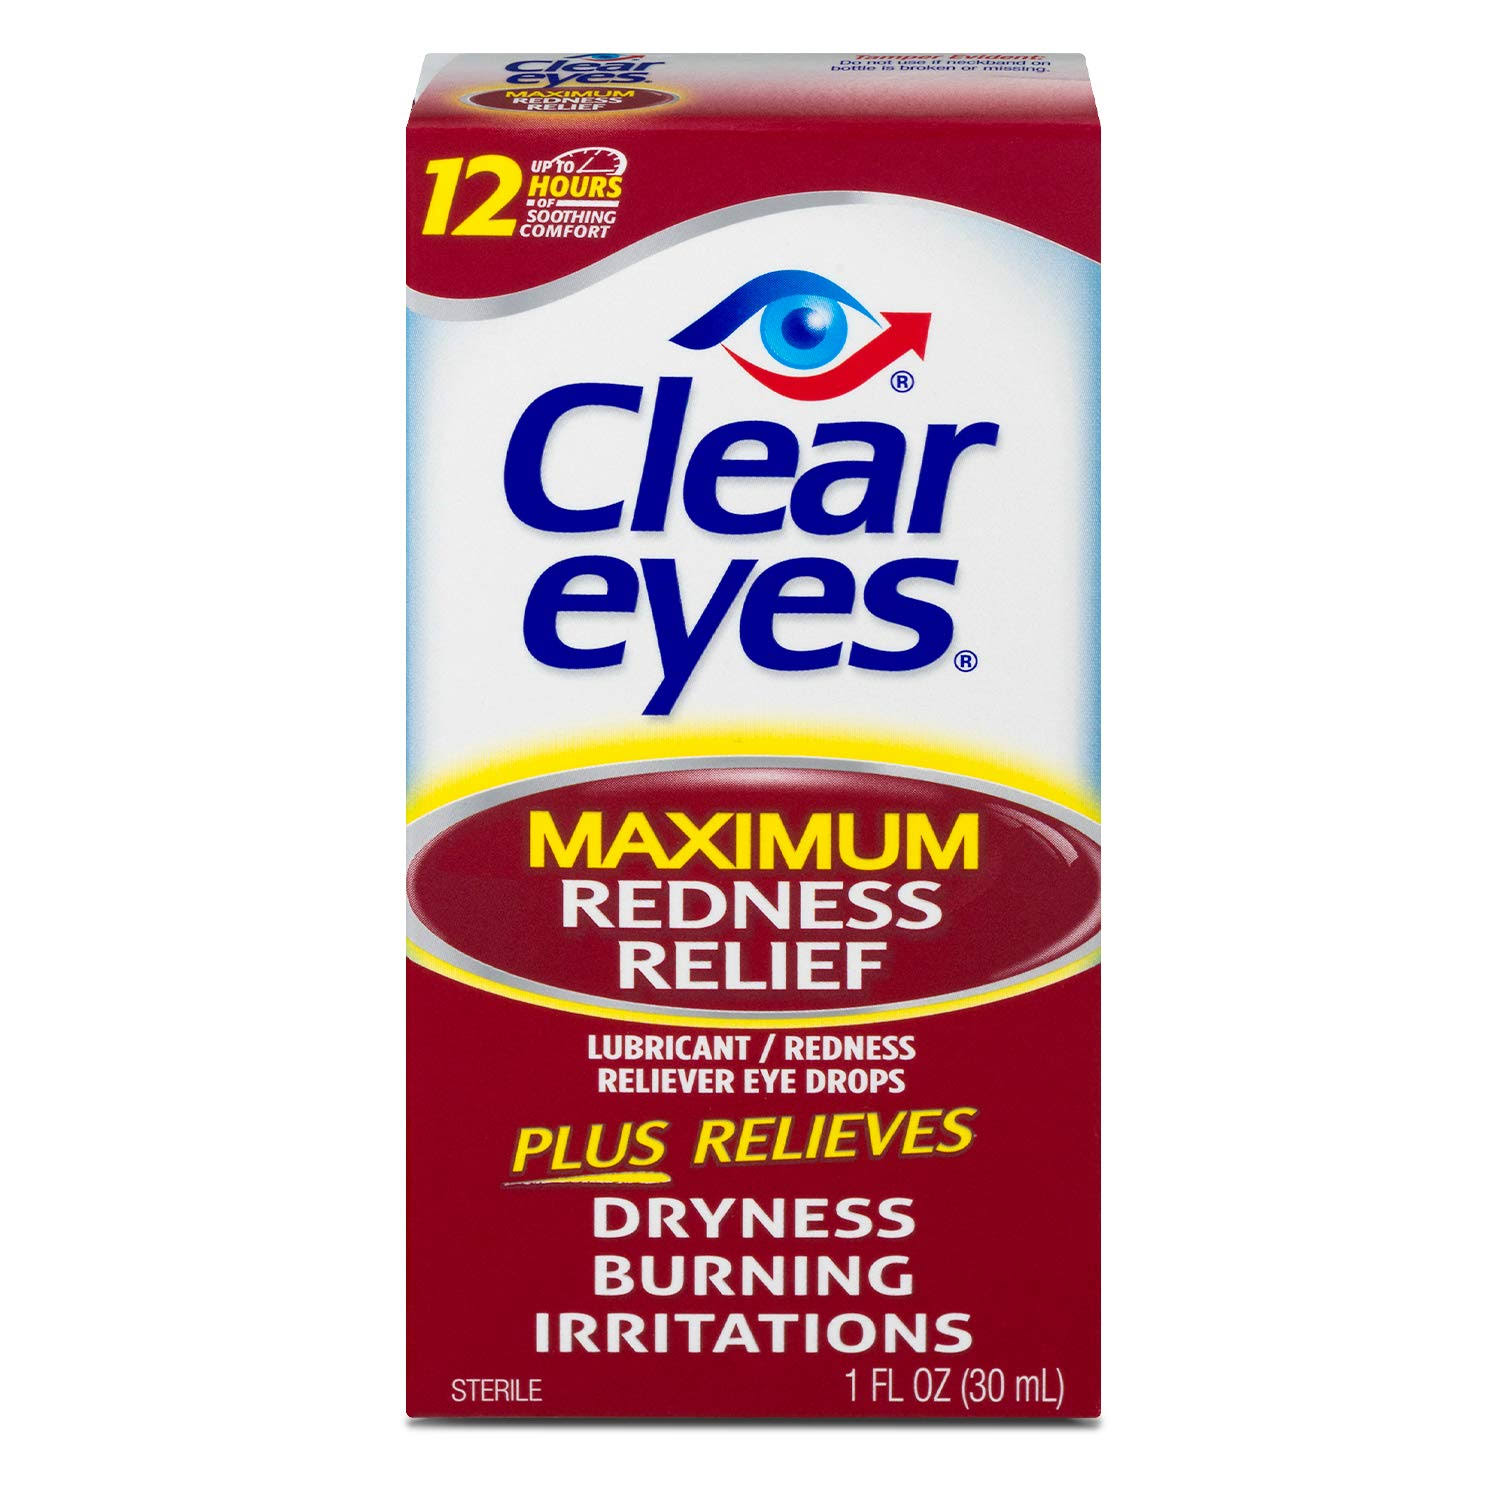 Clear Eyes Sterile Lubricant Redness Reliever Eye Drops - 1oz